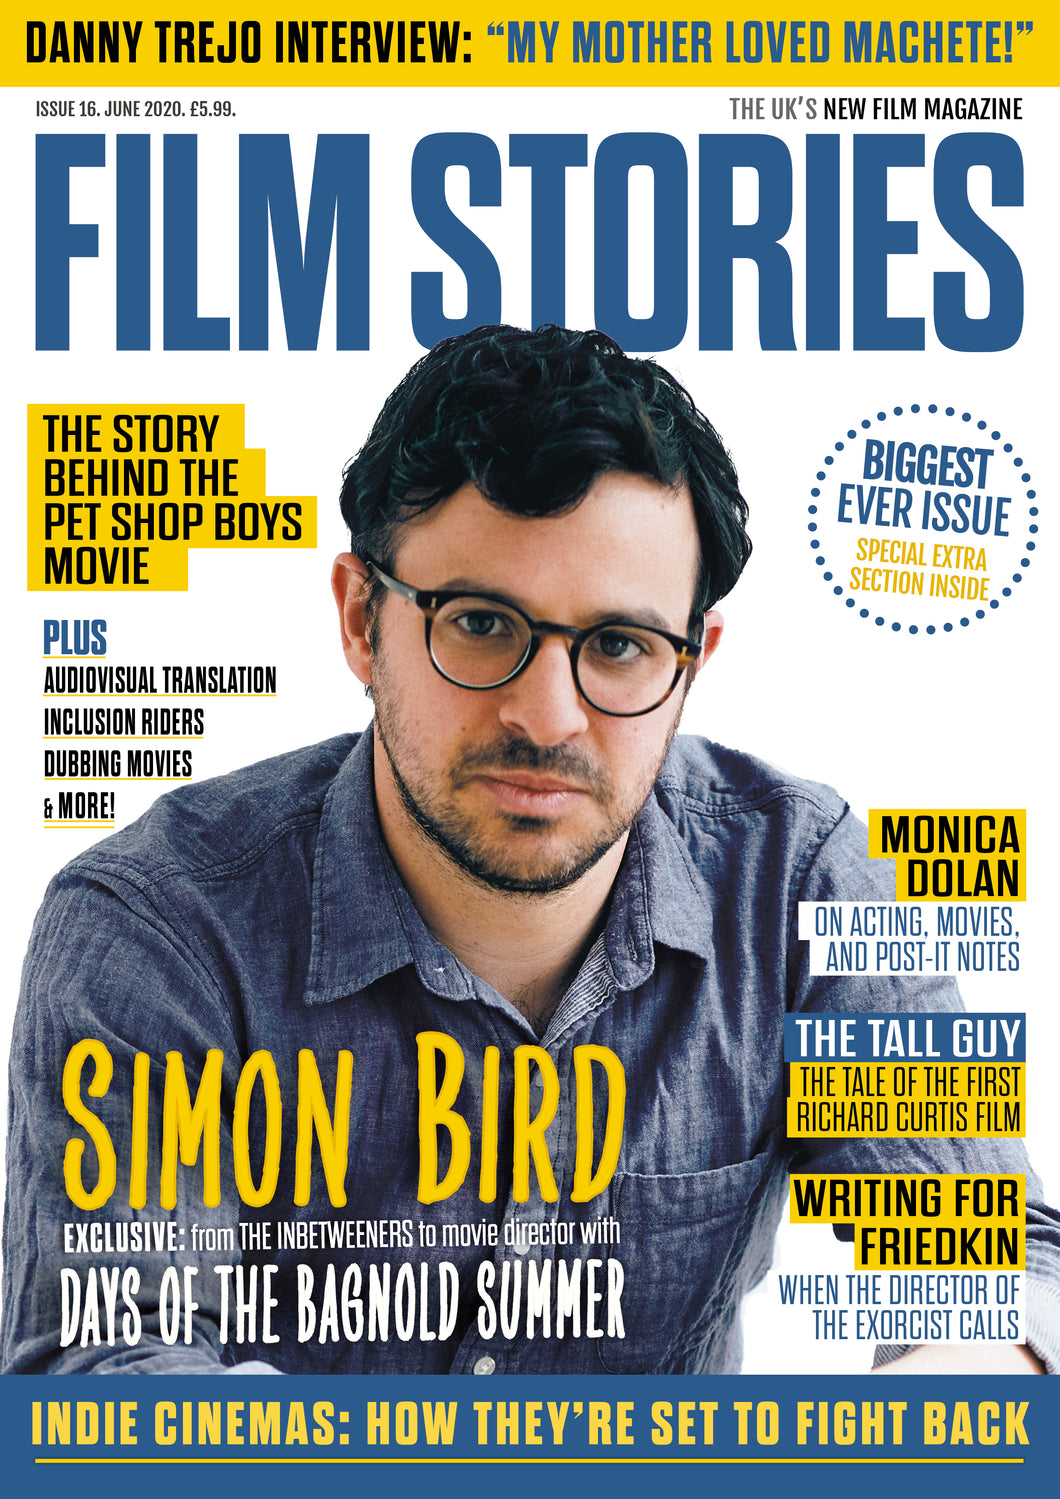 Film Stories issue 16 print edition (June 2020)